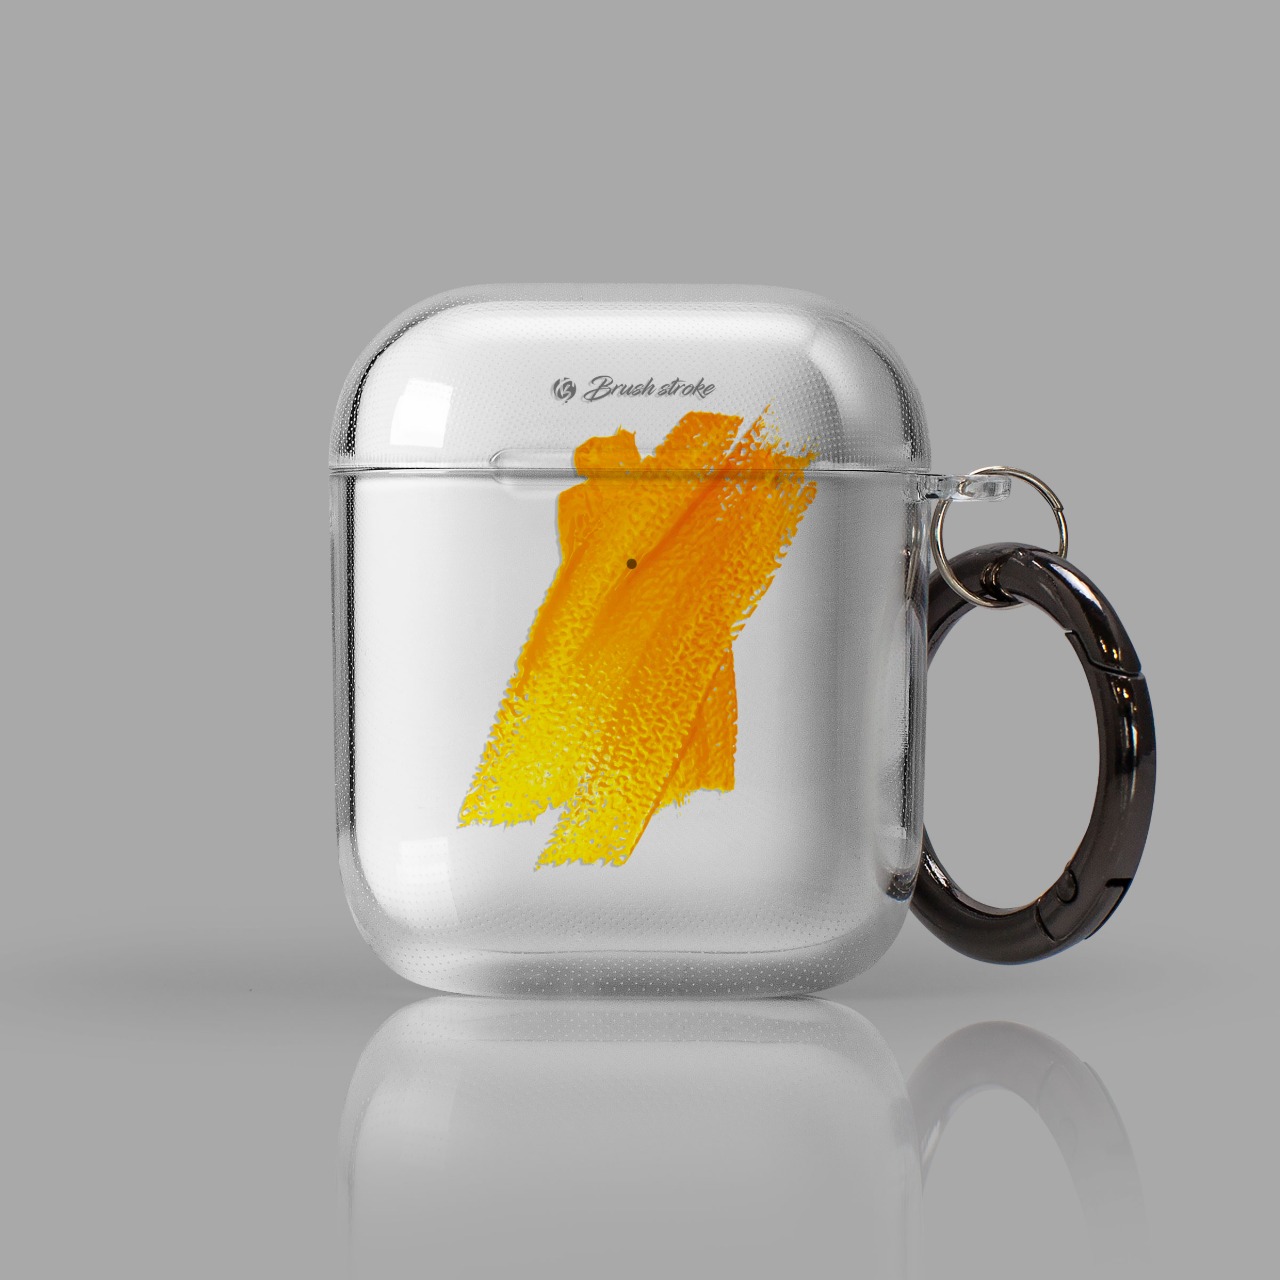 [Airpods cases] Brushstrokes No.19